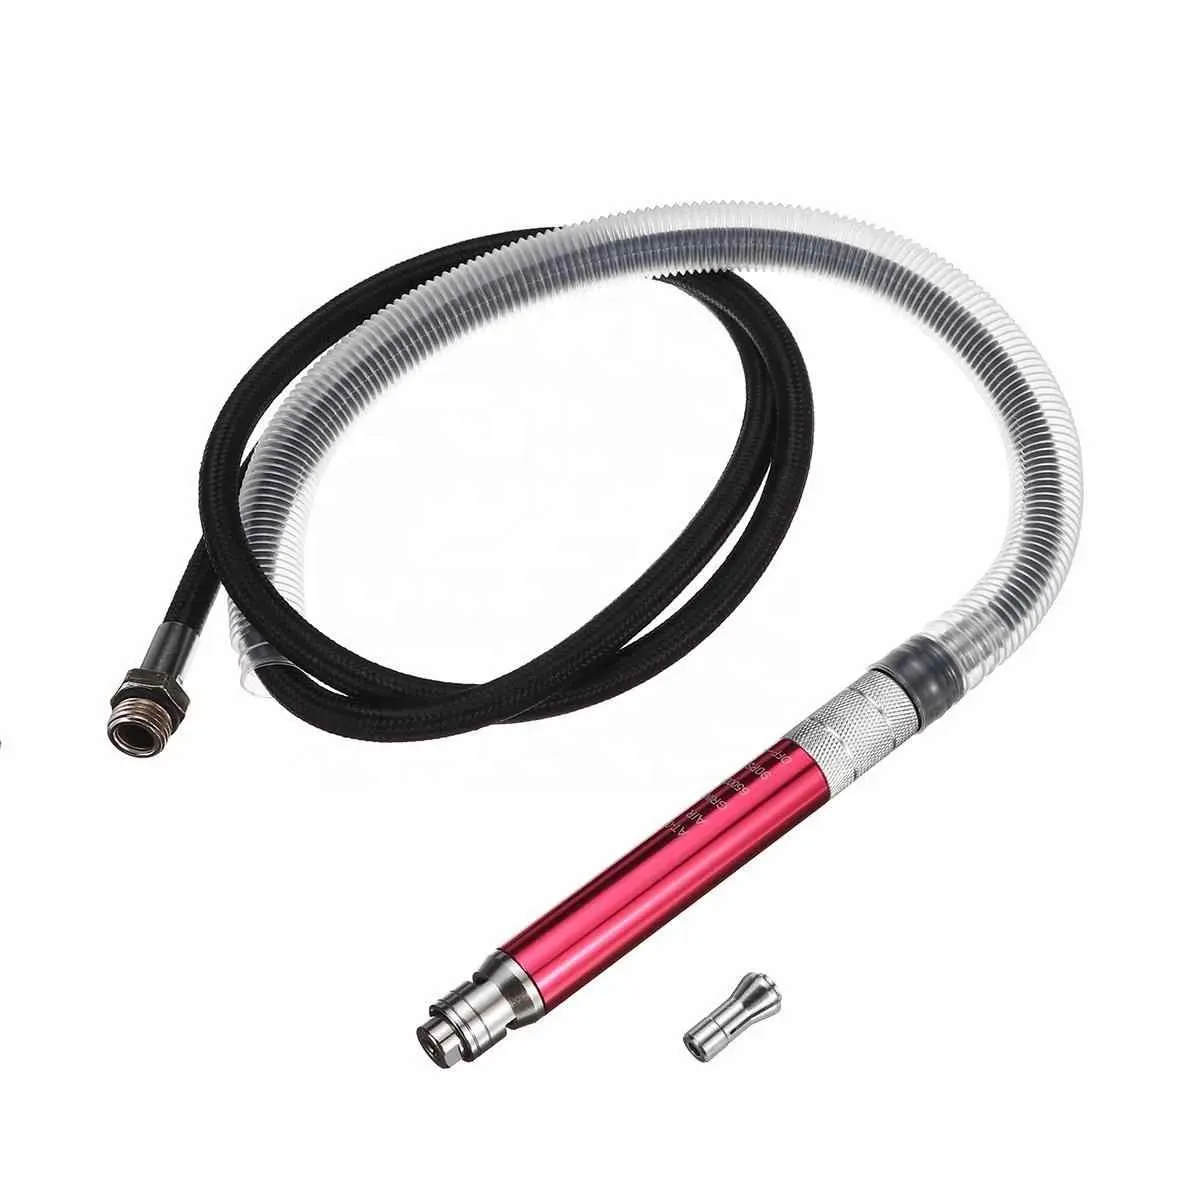 Air Micro Die Grinder Pencil Professional 65,000 RPM High Speed Cutting Wood Jewelry Polishing Grinding Engraving Pneumatic Tool